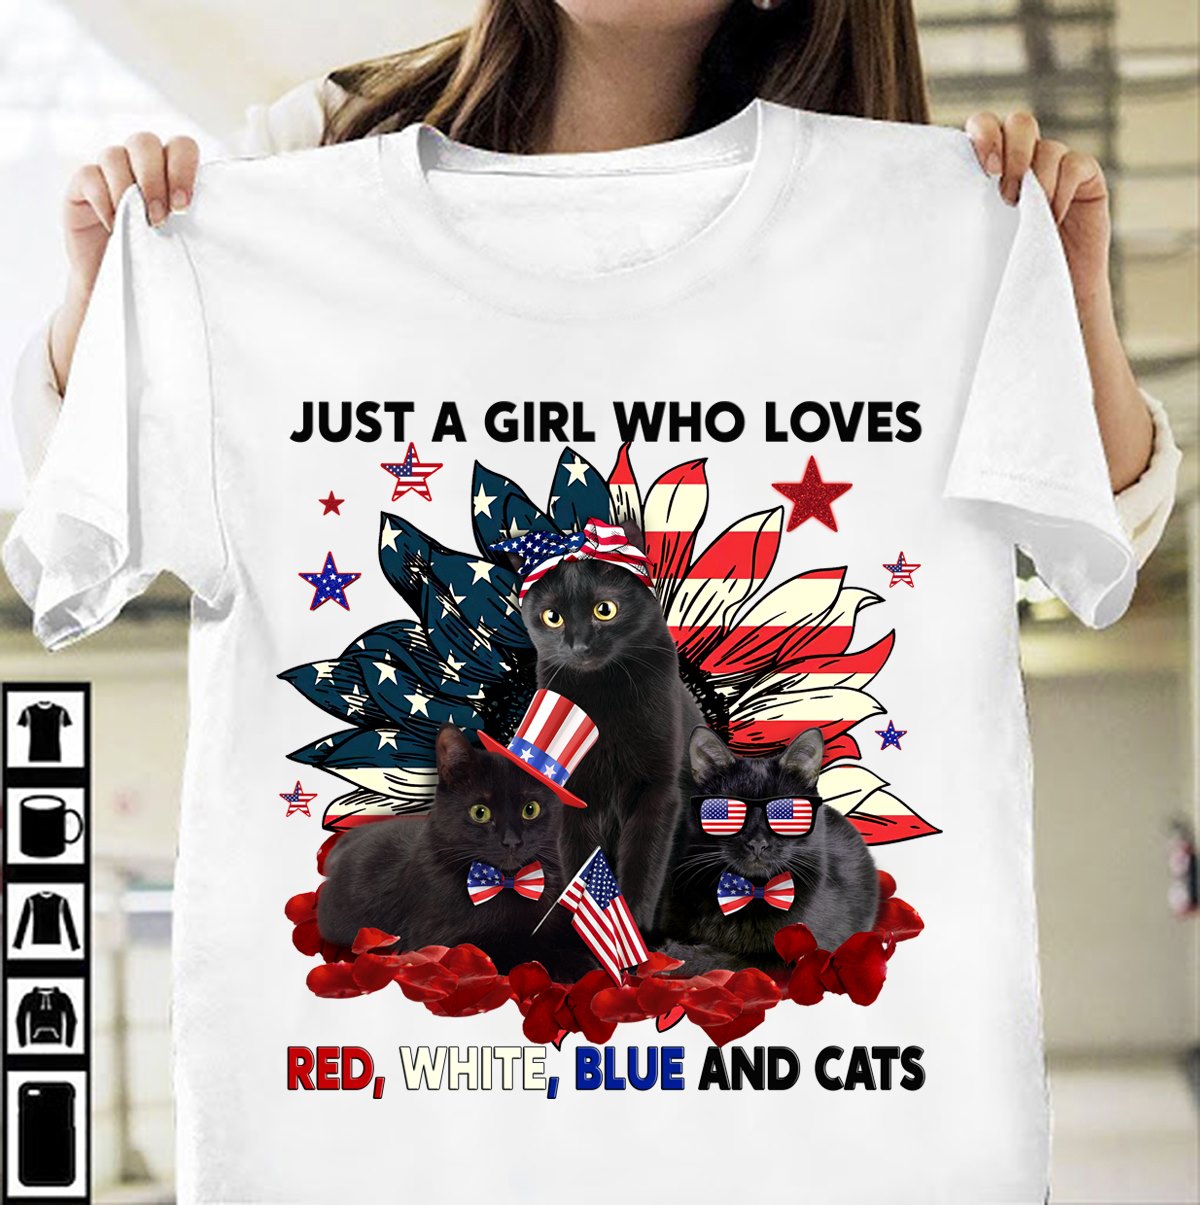 Just a girl who loves red, white, blue and cats - America flag, cat lover